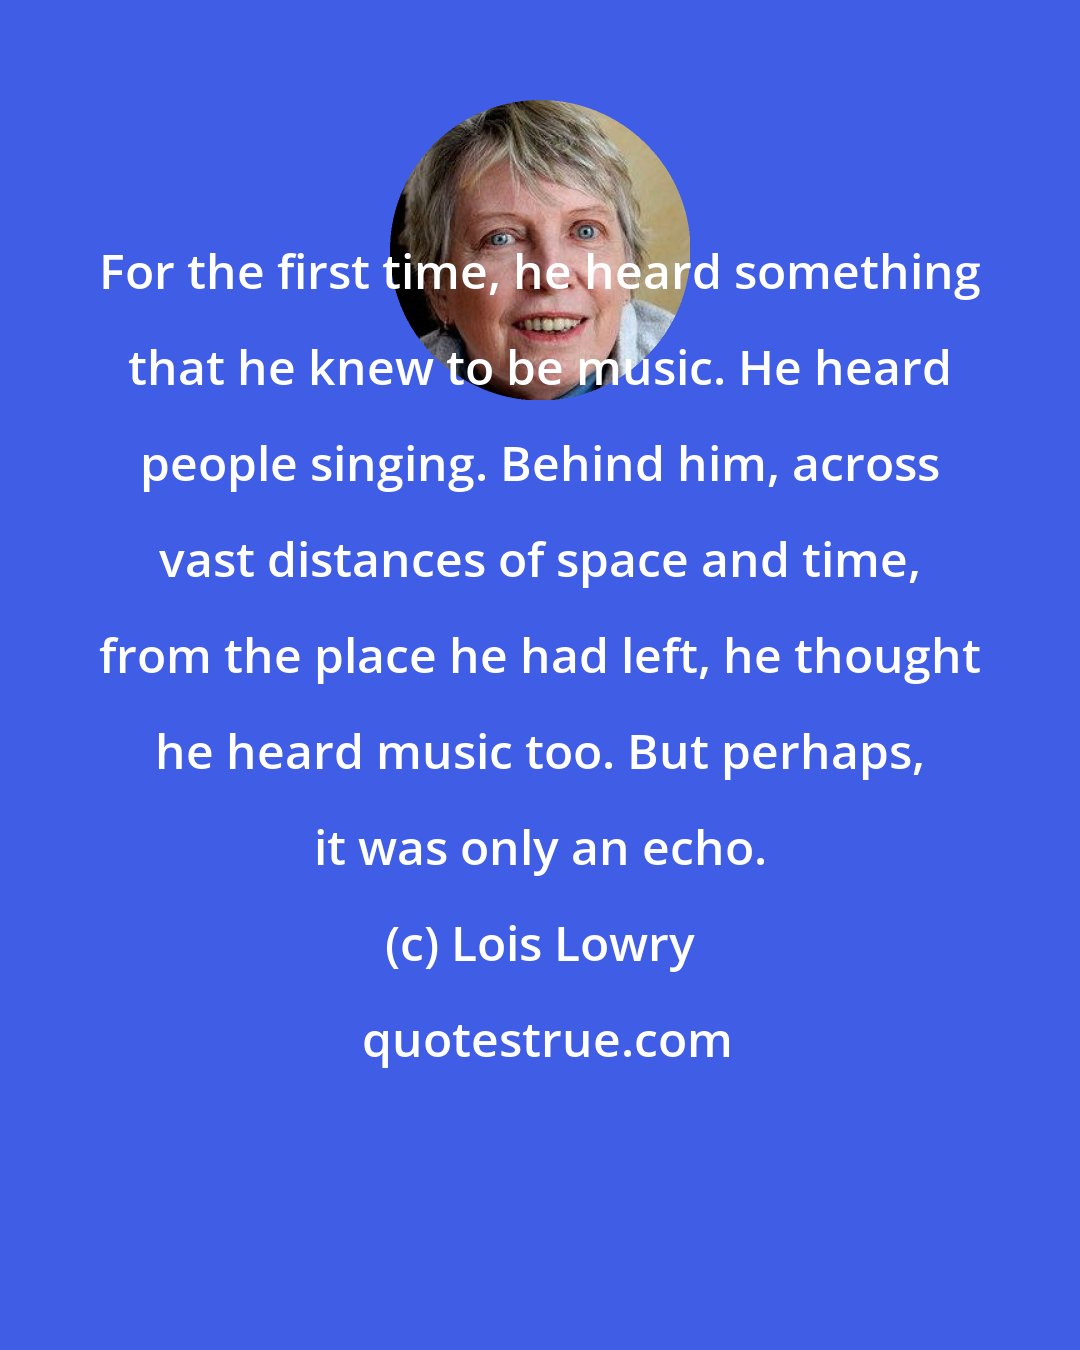 Lois Lowry: For the first time, he heard something that he knew to be music. He heard people singing. Behind him, across vast distances of space and time, from the place he had left, he thought he heard music too. But perhaps, it was only an echo.